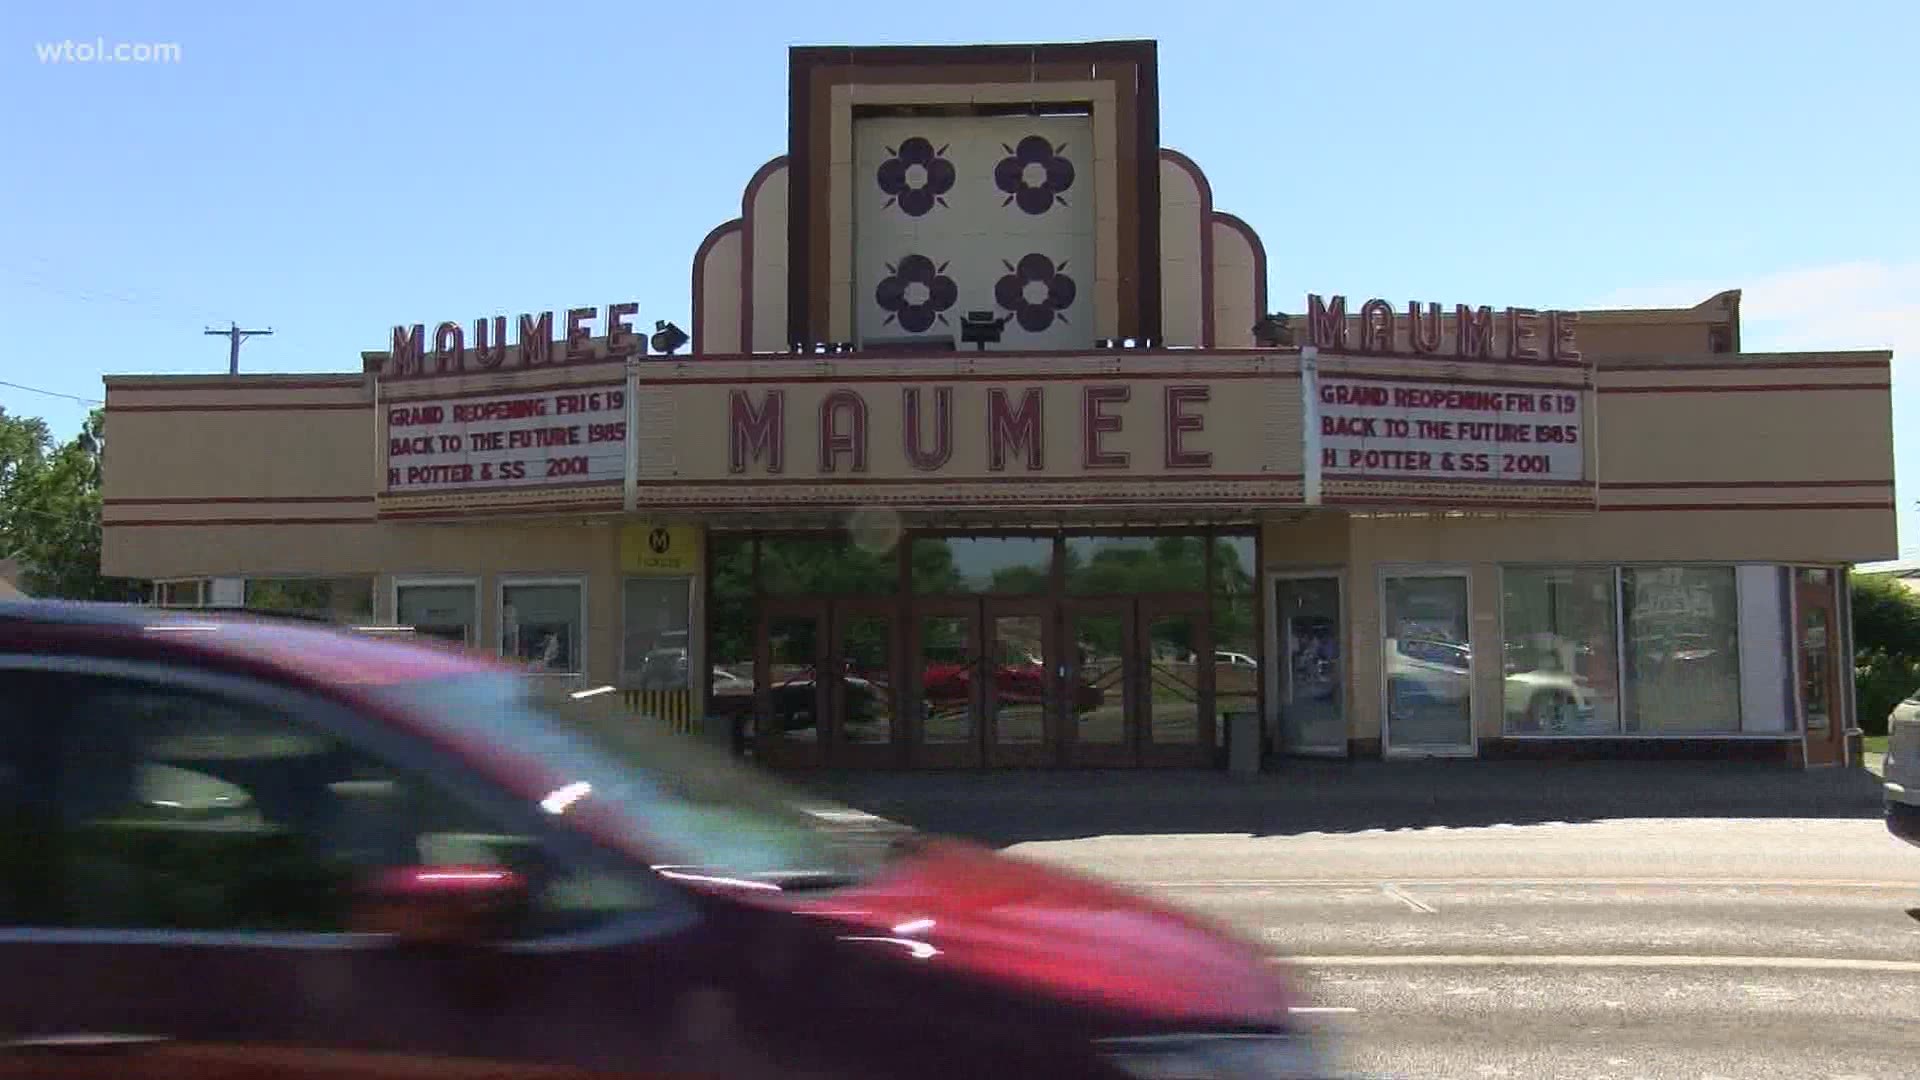 The theatre is set to reopen in a big way, with a showing of "Back to the Future" kicking off its summer offerings.